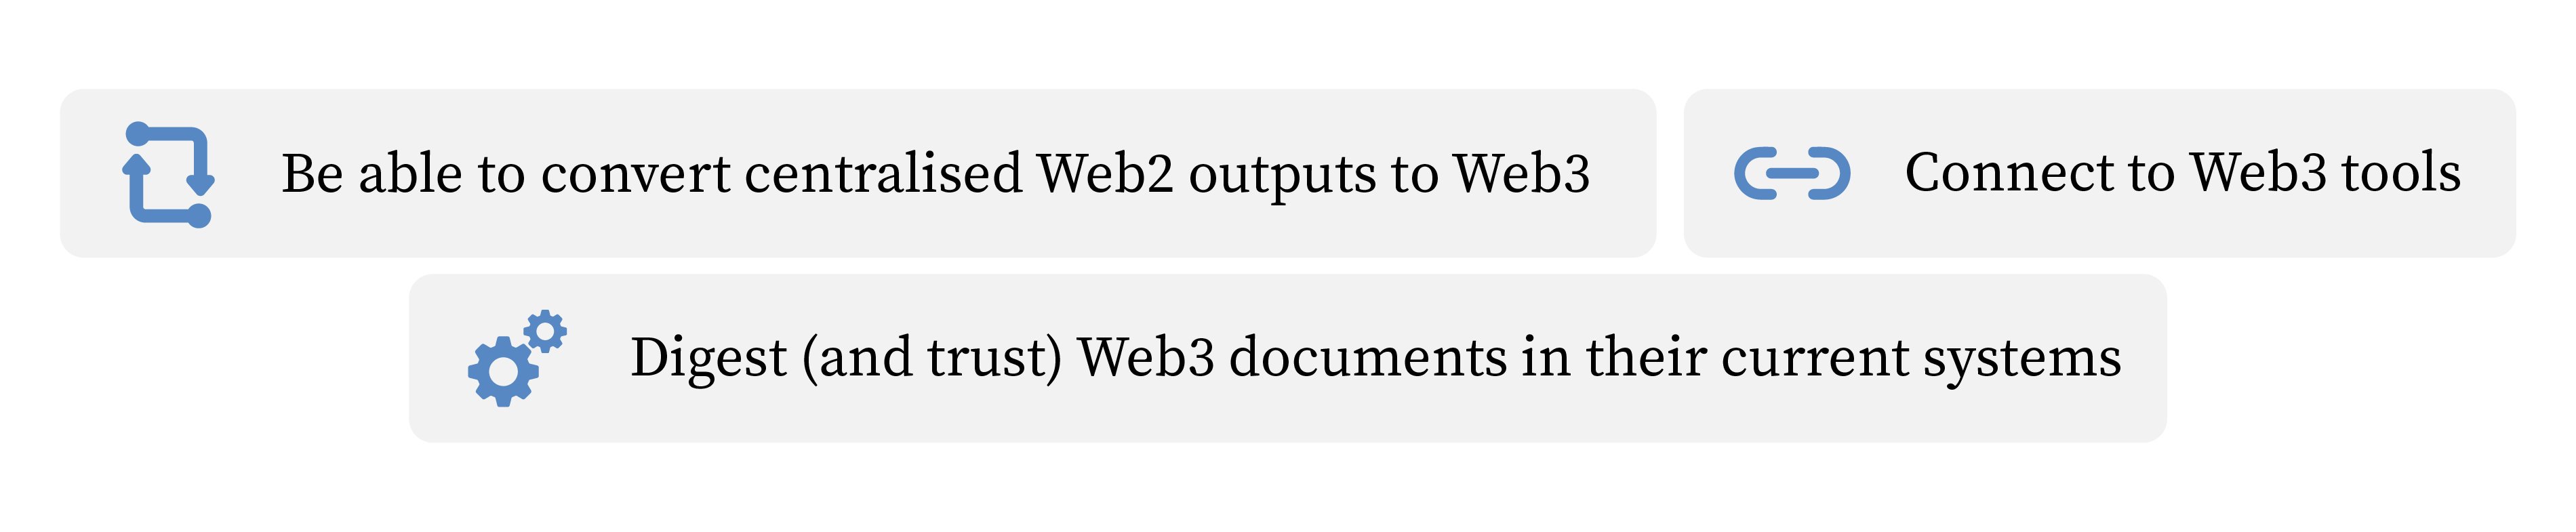 The next step to the Web3 industrial revolution is to bridge companies from Web2. As companies transition from centralised systems, they would need to: be able to convert centralised Web2 to Web3, connect to Web3 tools, and digest (and trust) Web3 documents in their current systems.